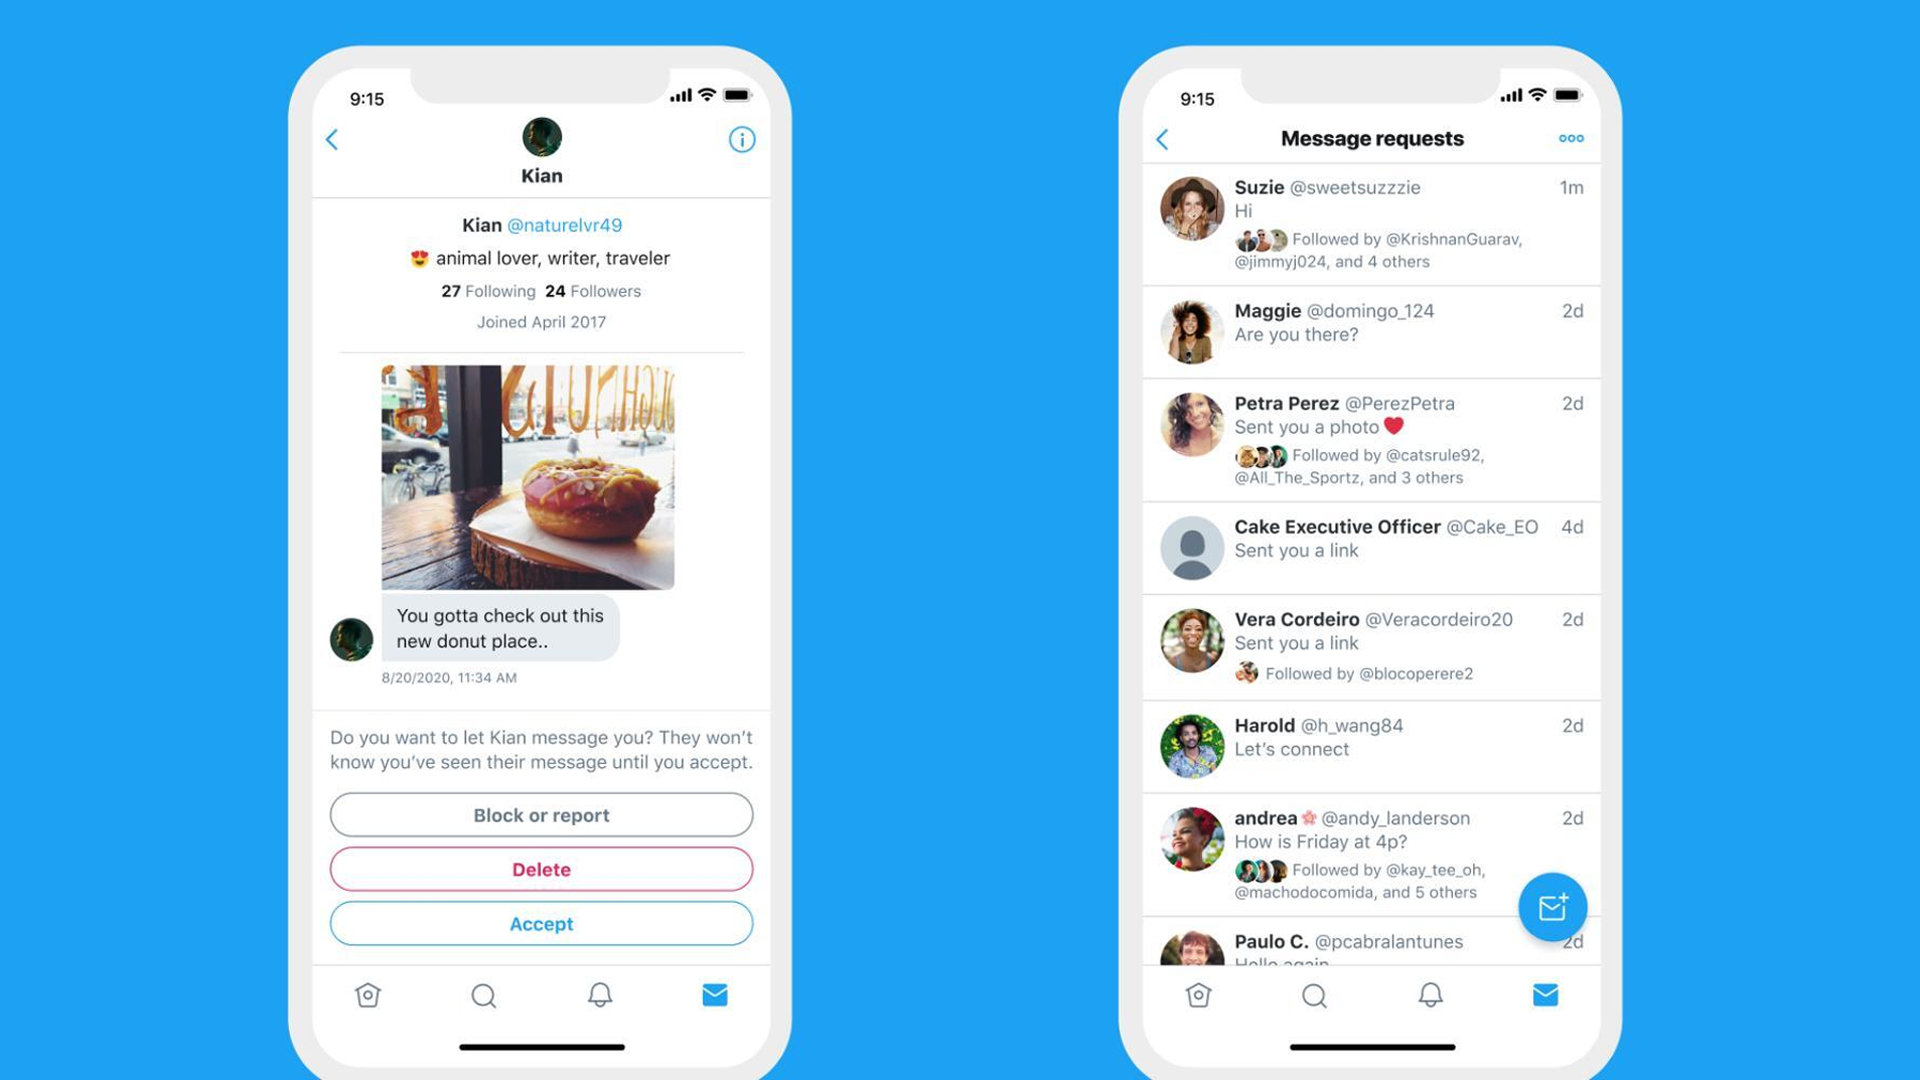 Twitter Is Providing More Contextual Files for DM Requests